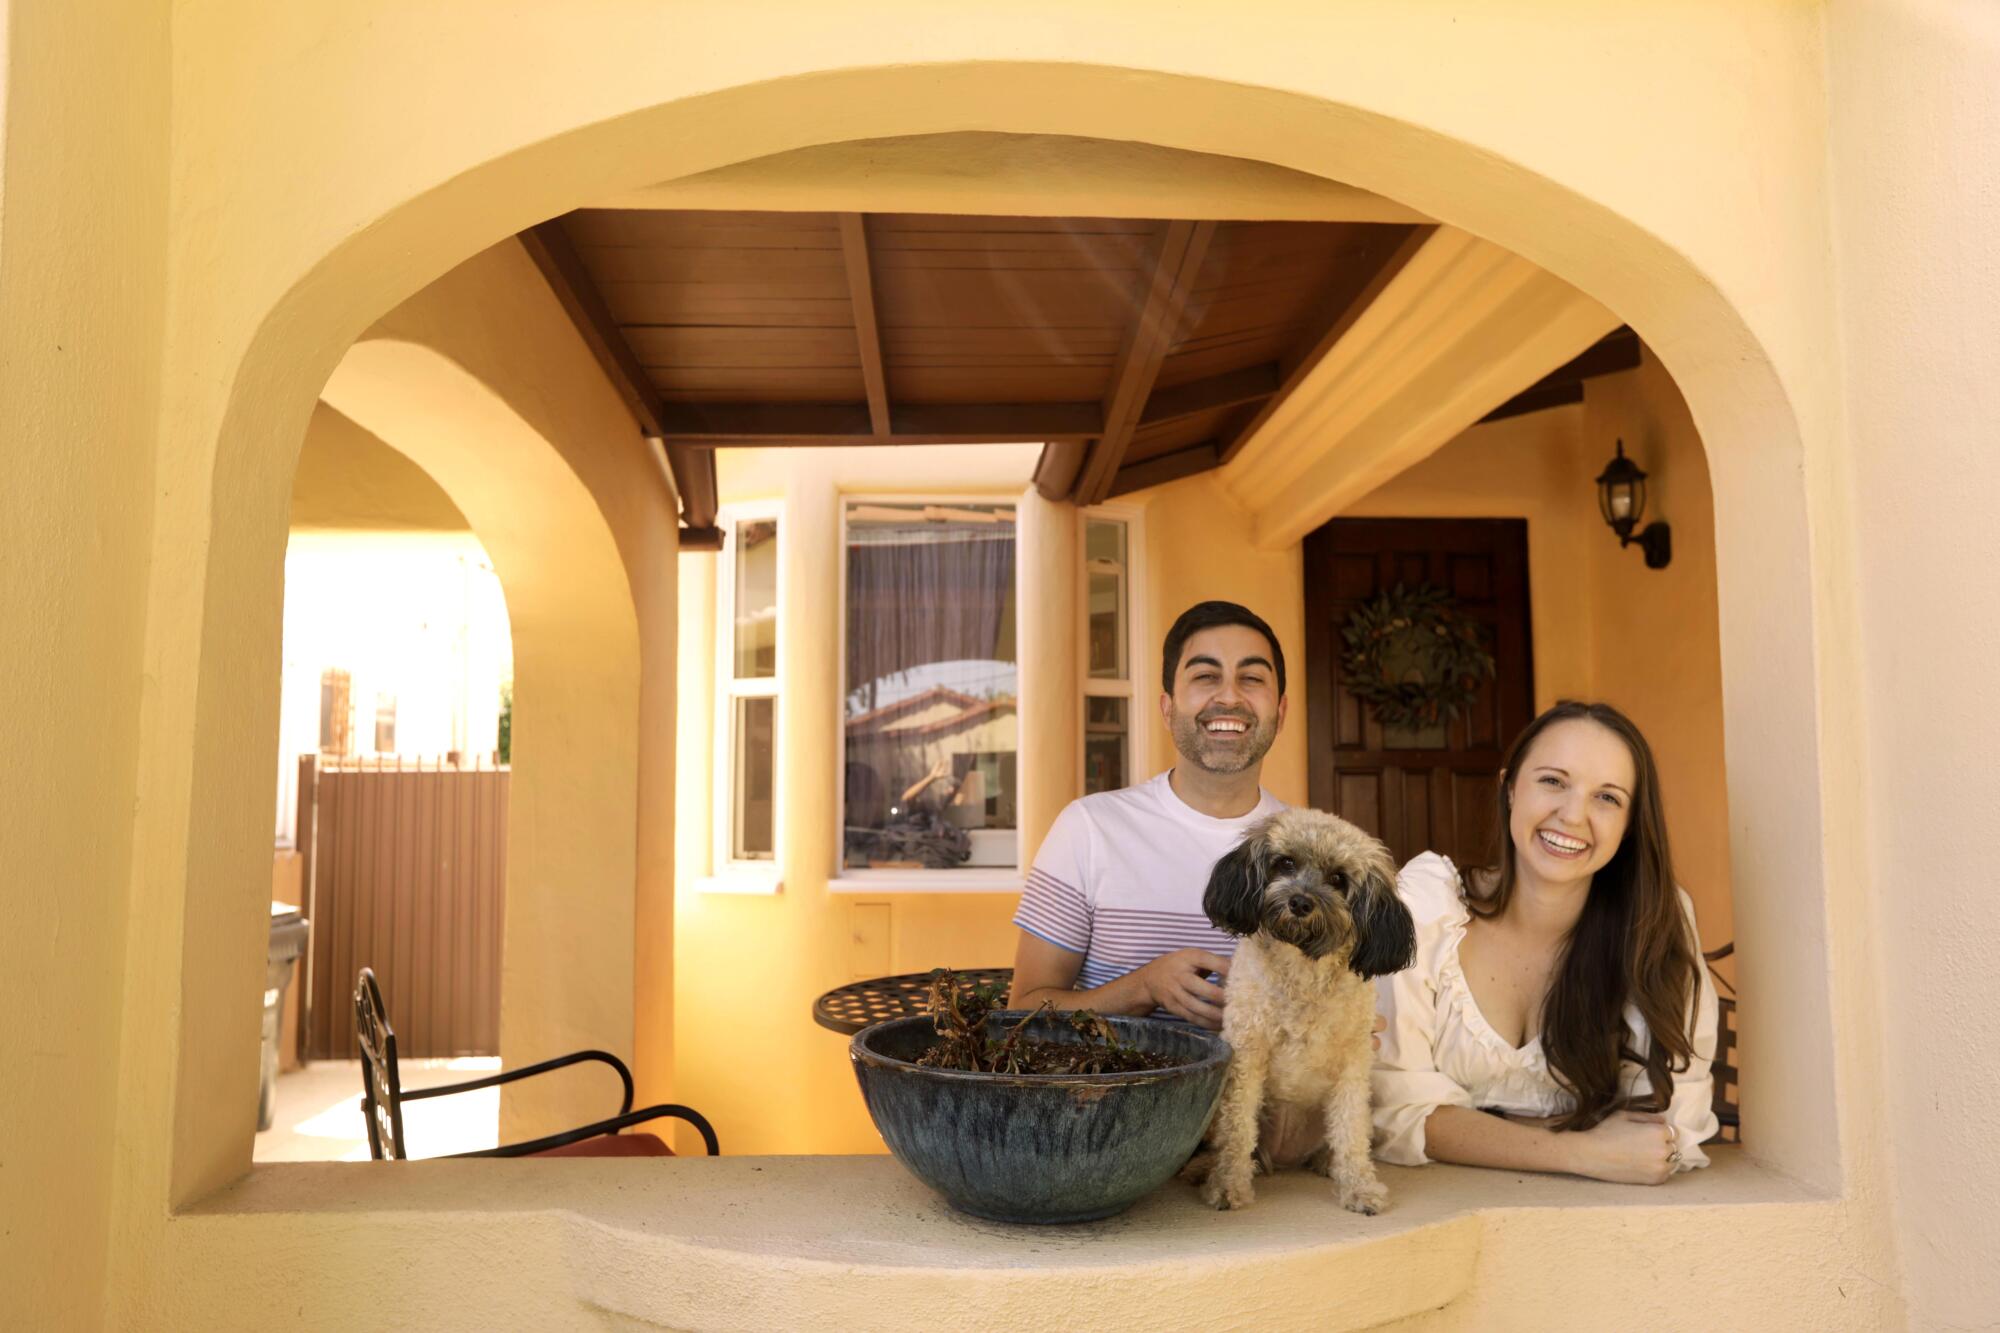 Devin Sunseri, his then fiancee, Katie Scardino, and their dog Tallulah on the porch of their home.